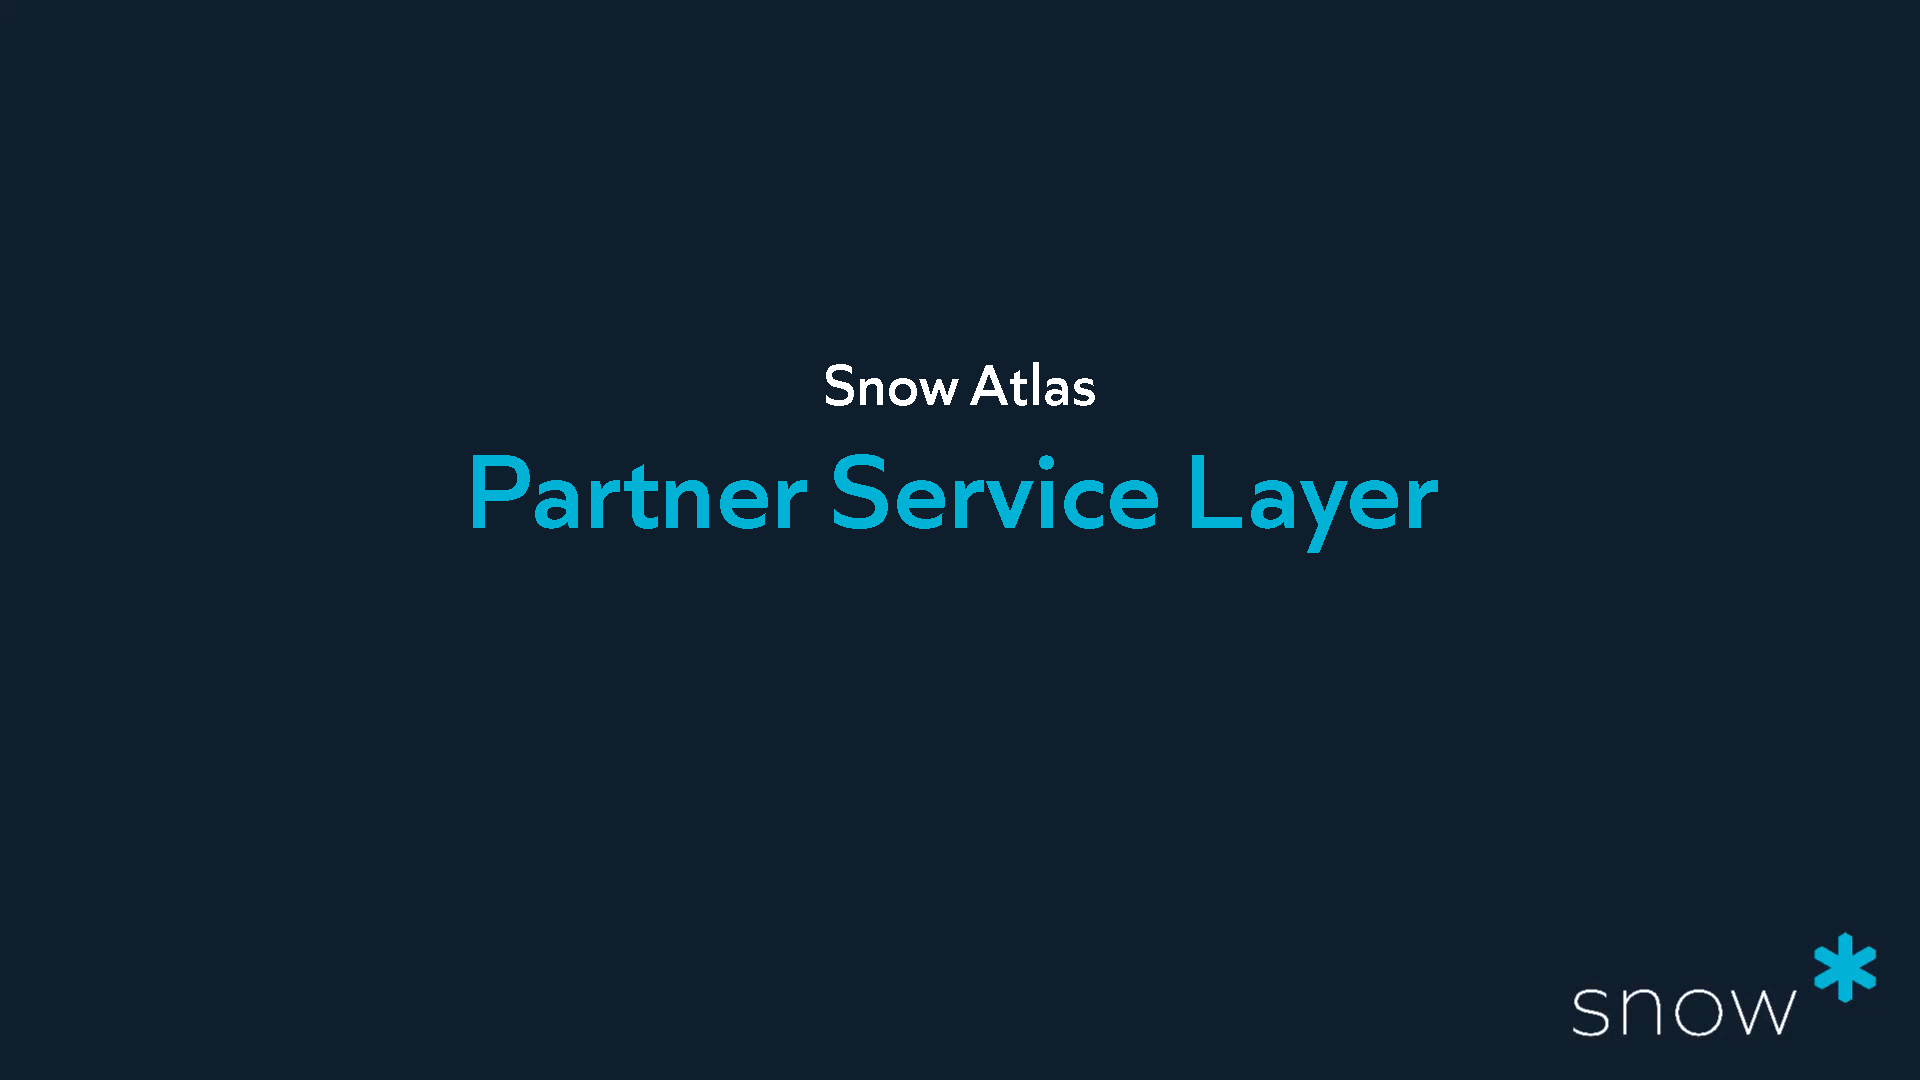 Introduction to the Partner Service Layer